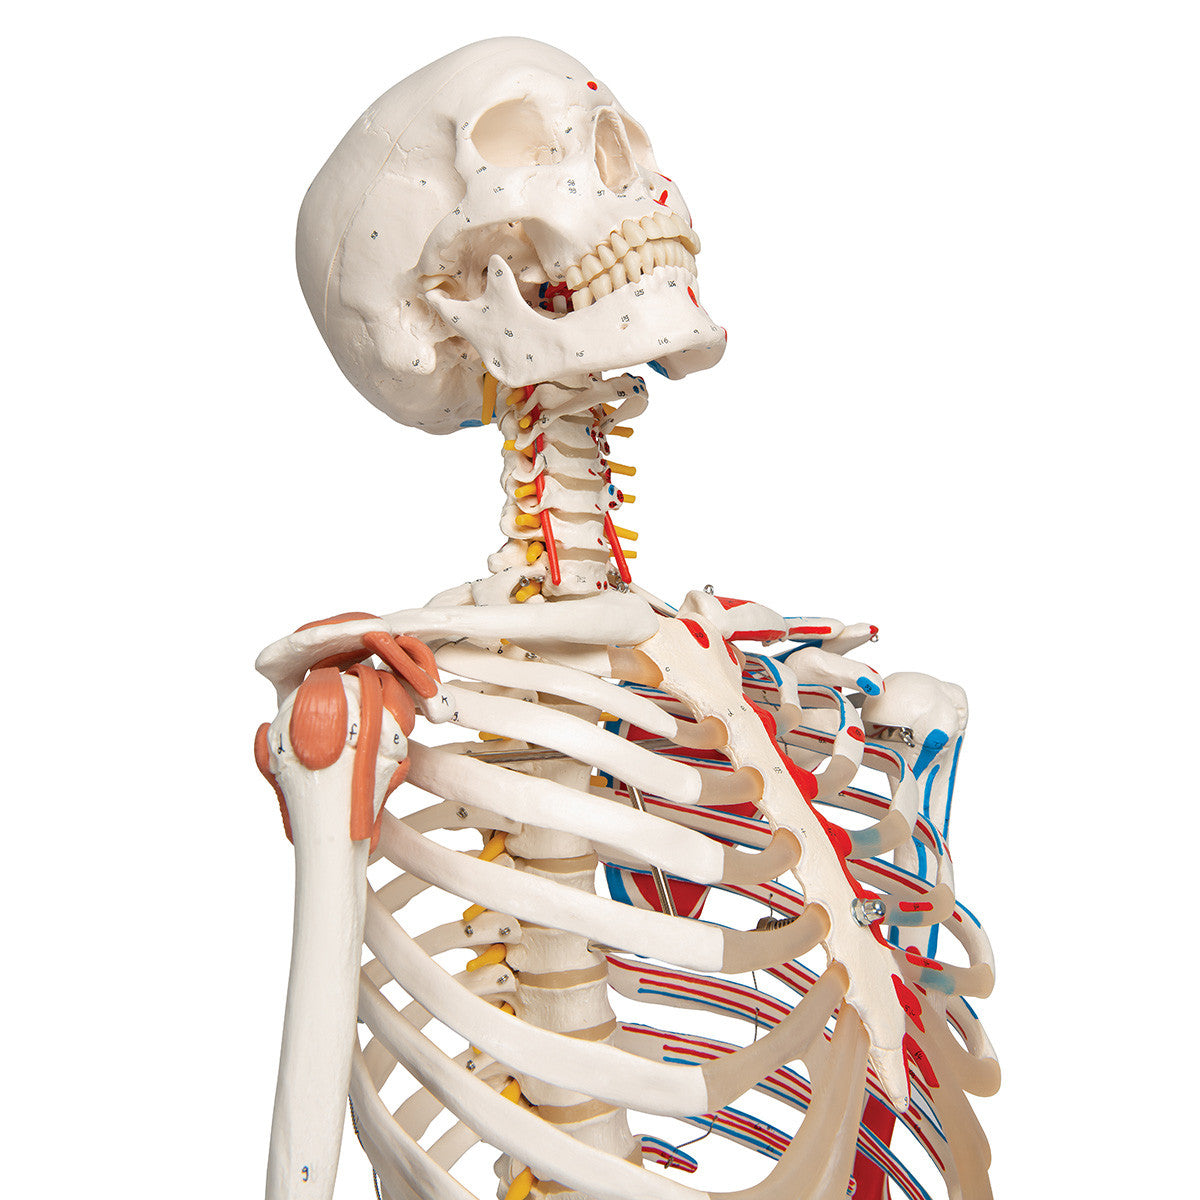 Super Skeleton with Muscle and Ligaments and Hanging Stand - Thorax